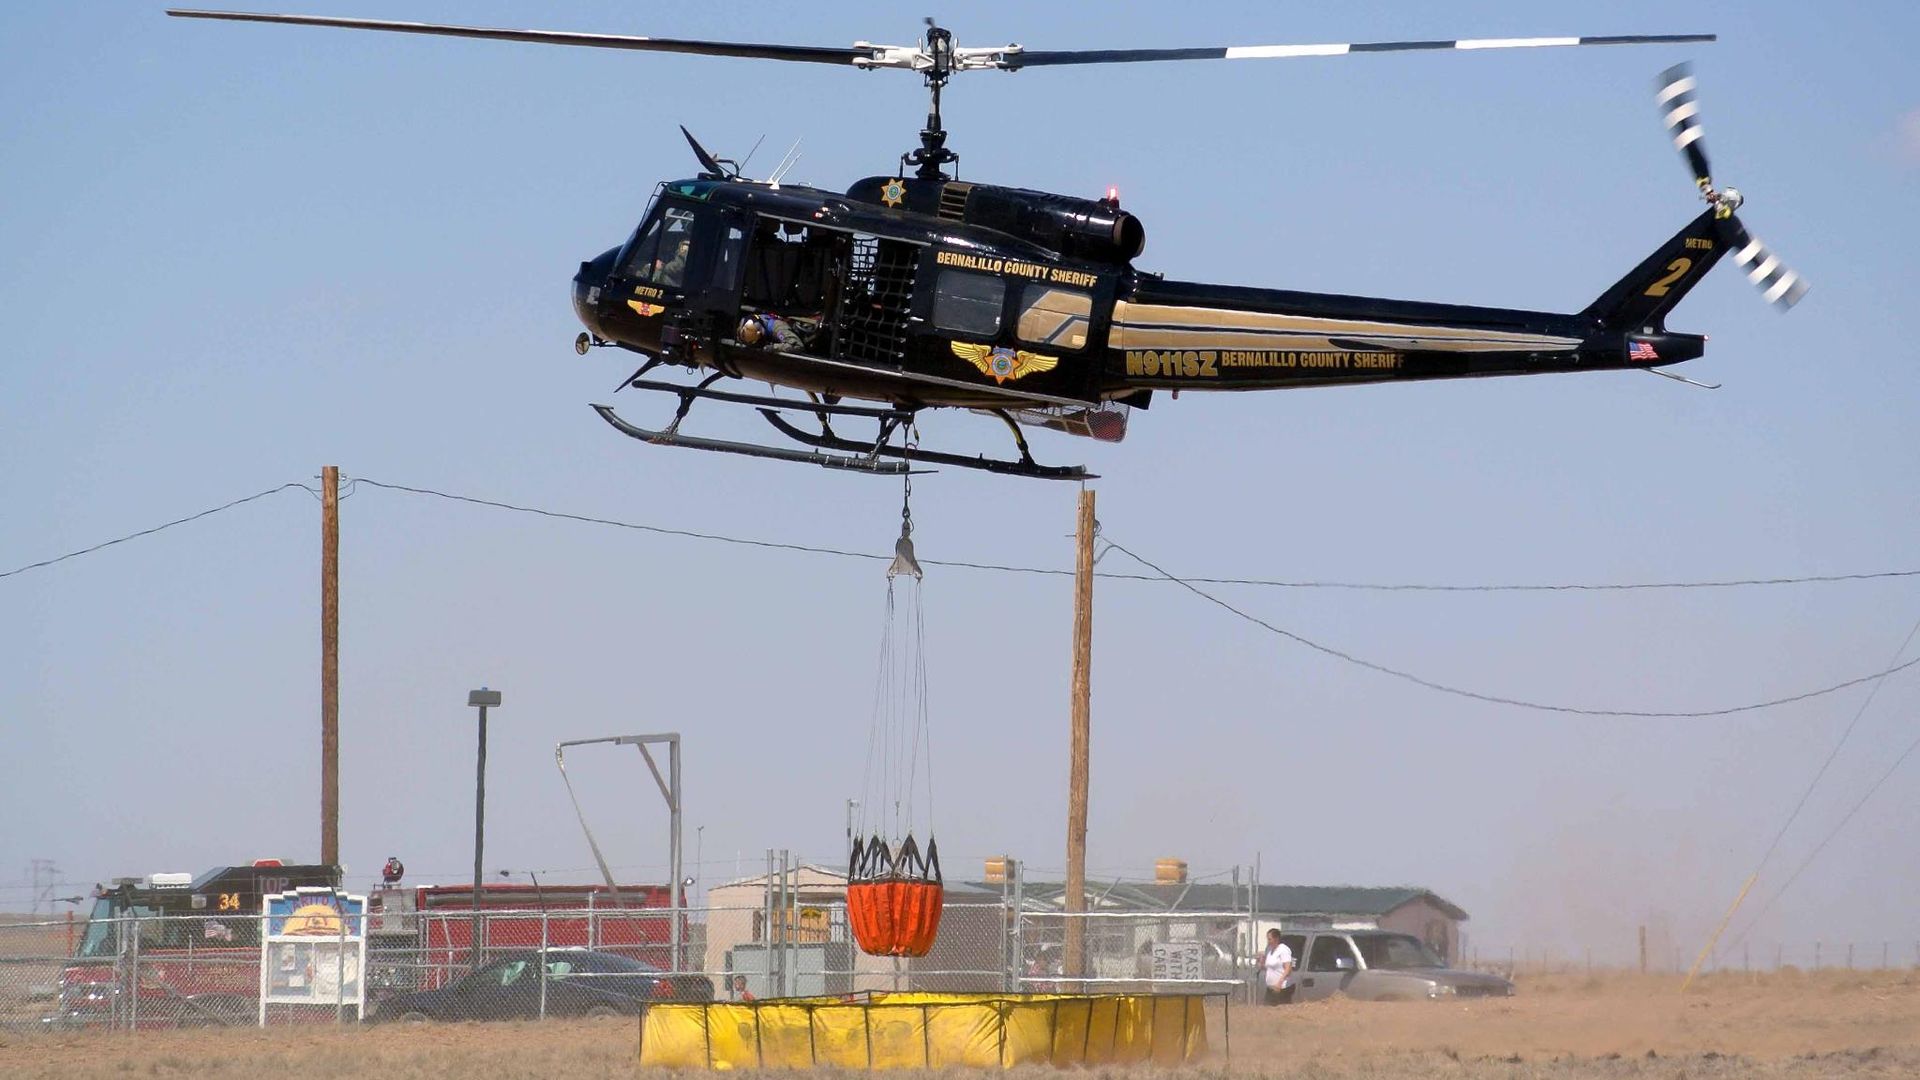 A helicopter from the Bernalillo County Sheriff’s Office in New Mexico that crashed over the weekend.